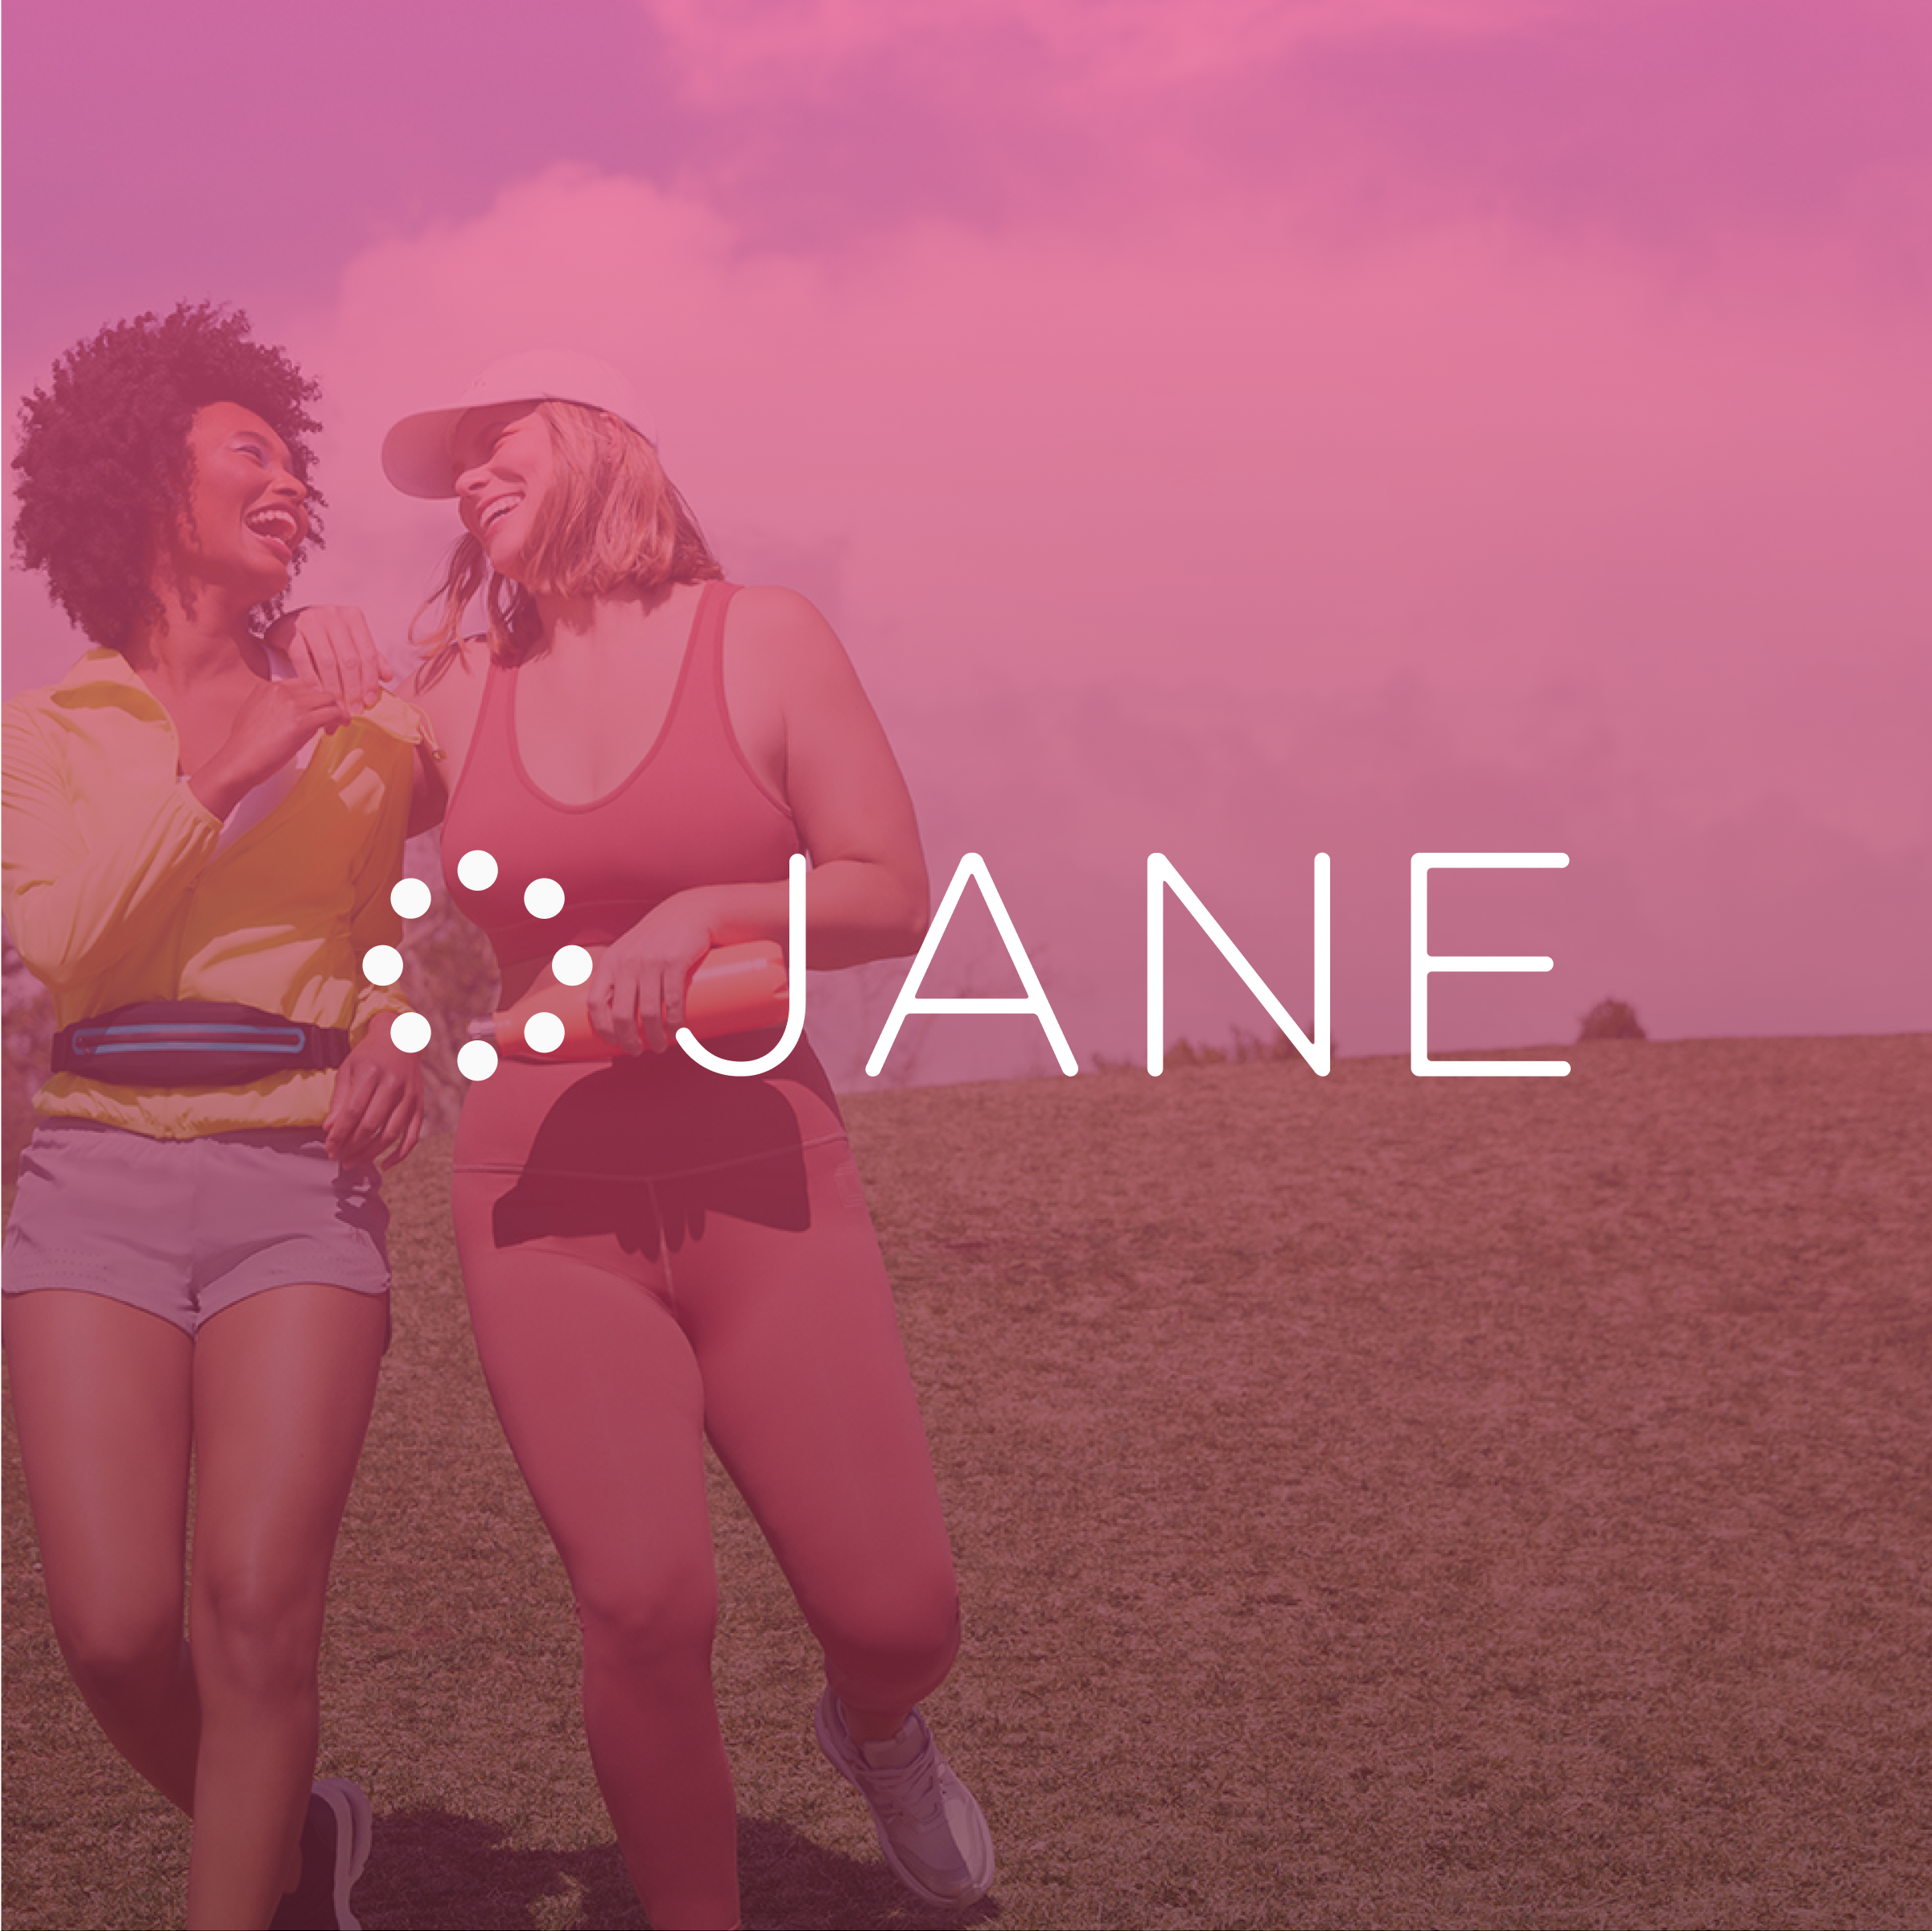 Jane looks to FullStory to fashion a seamless online experience